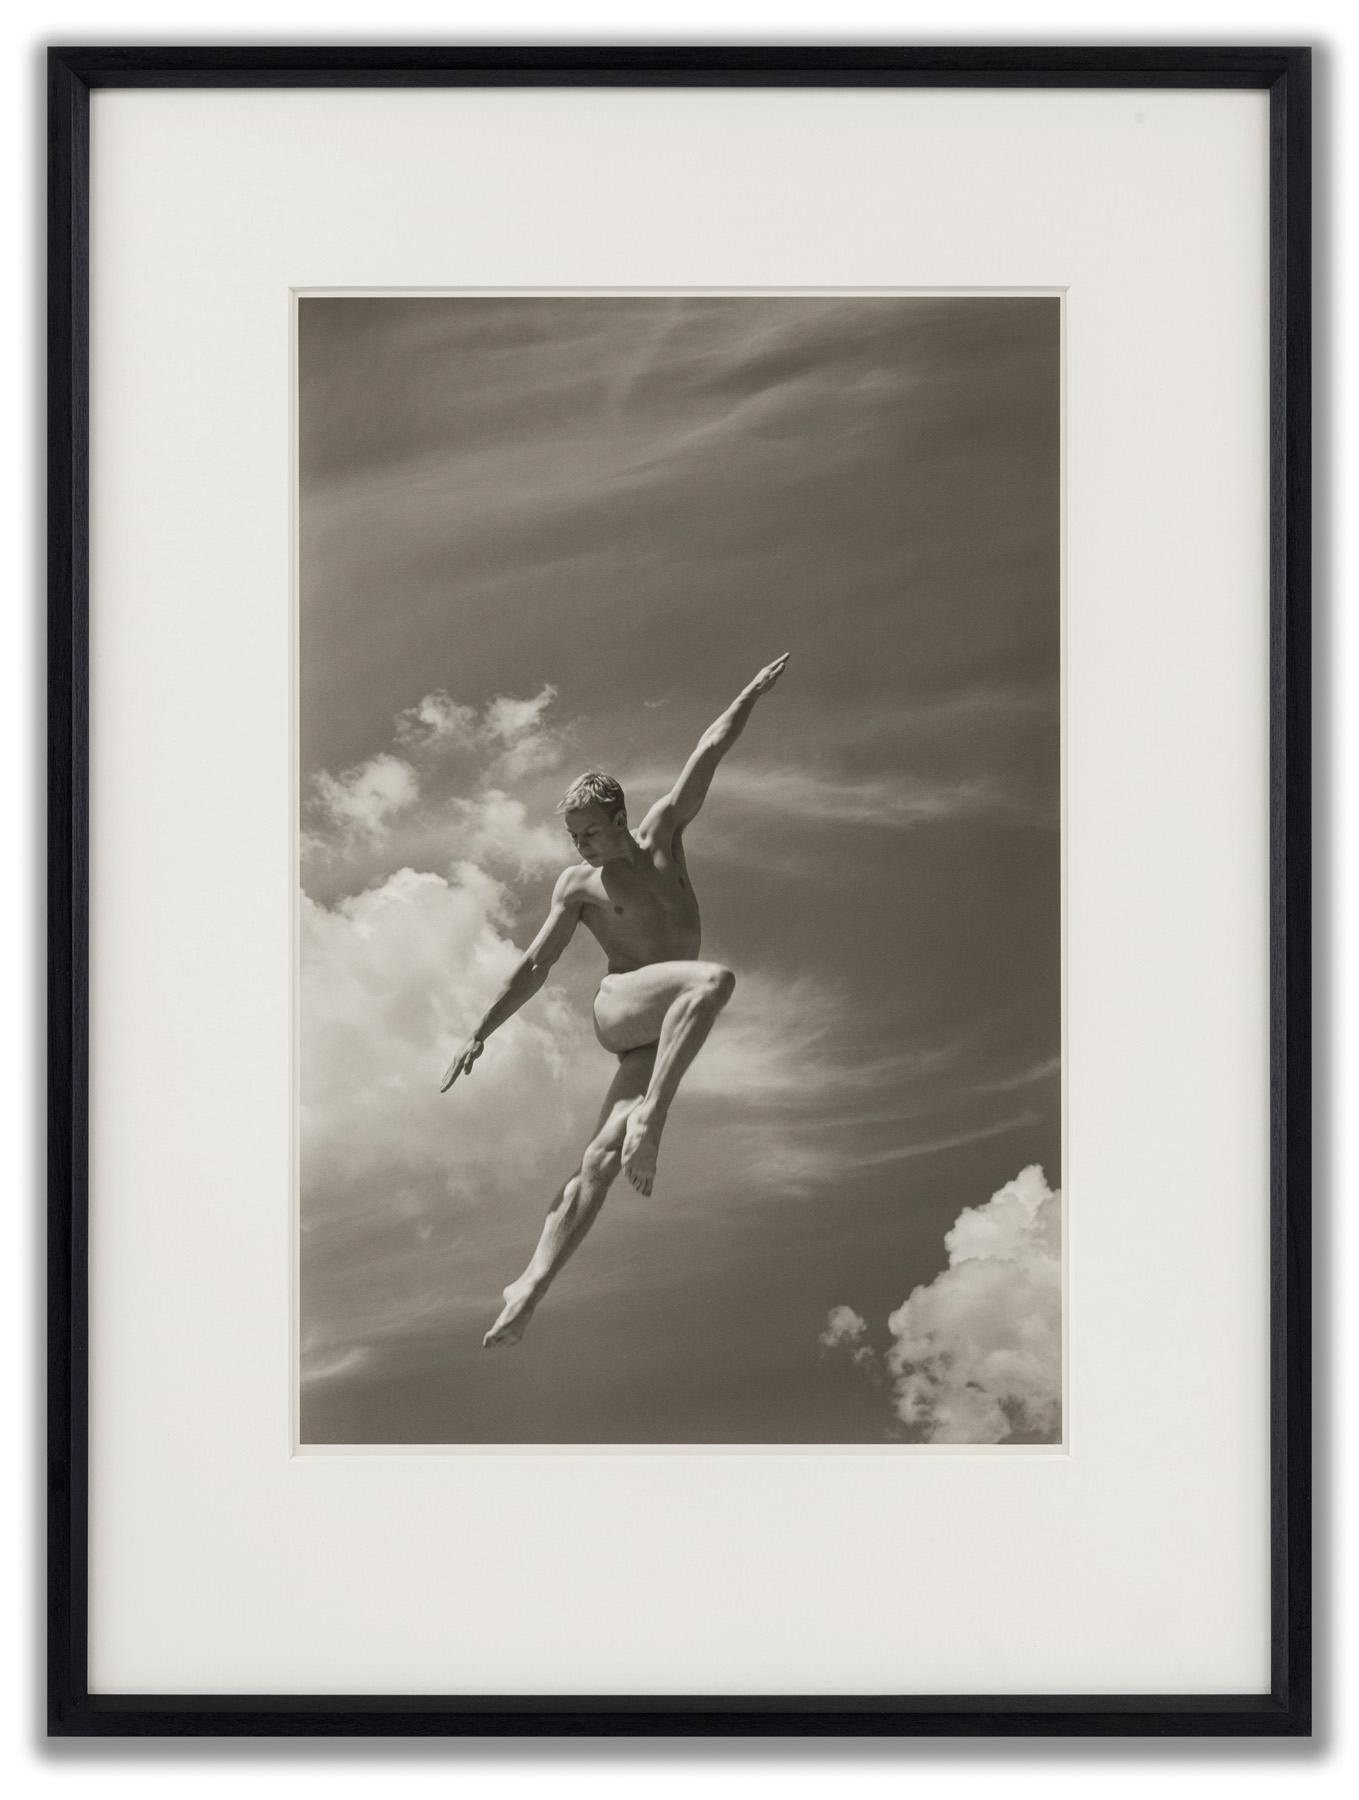 National Danish Gymnastics Team: Sky #18 - Photograph by Anderson and Low